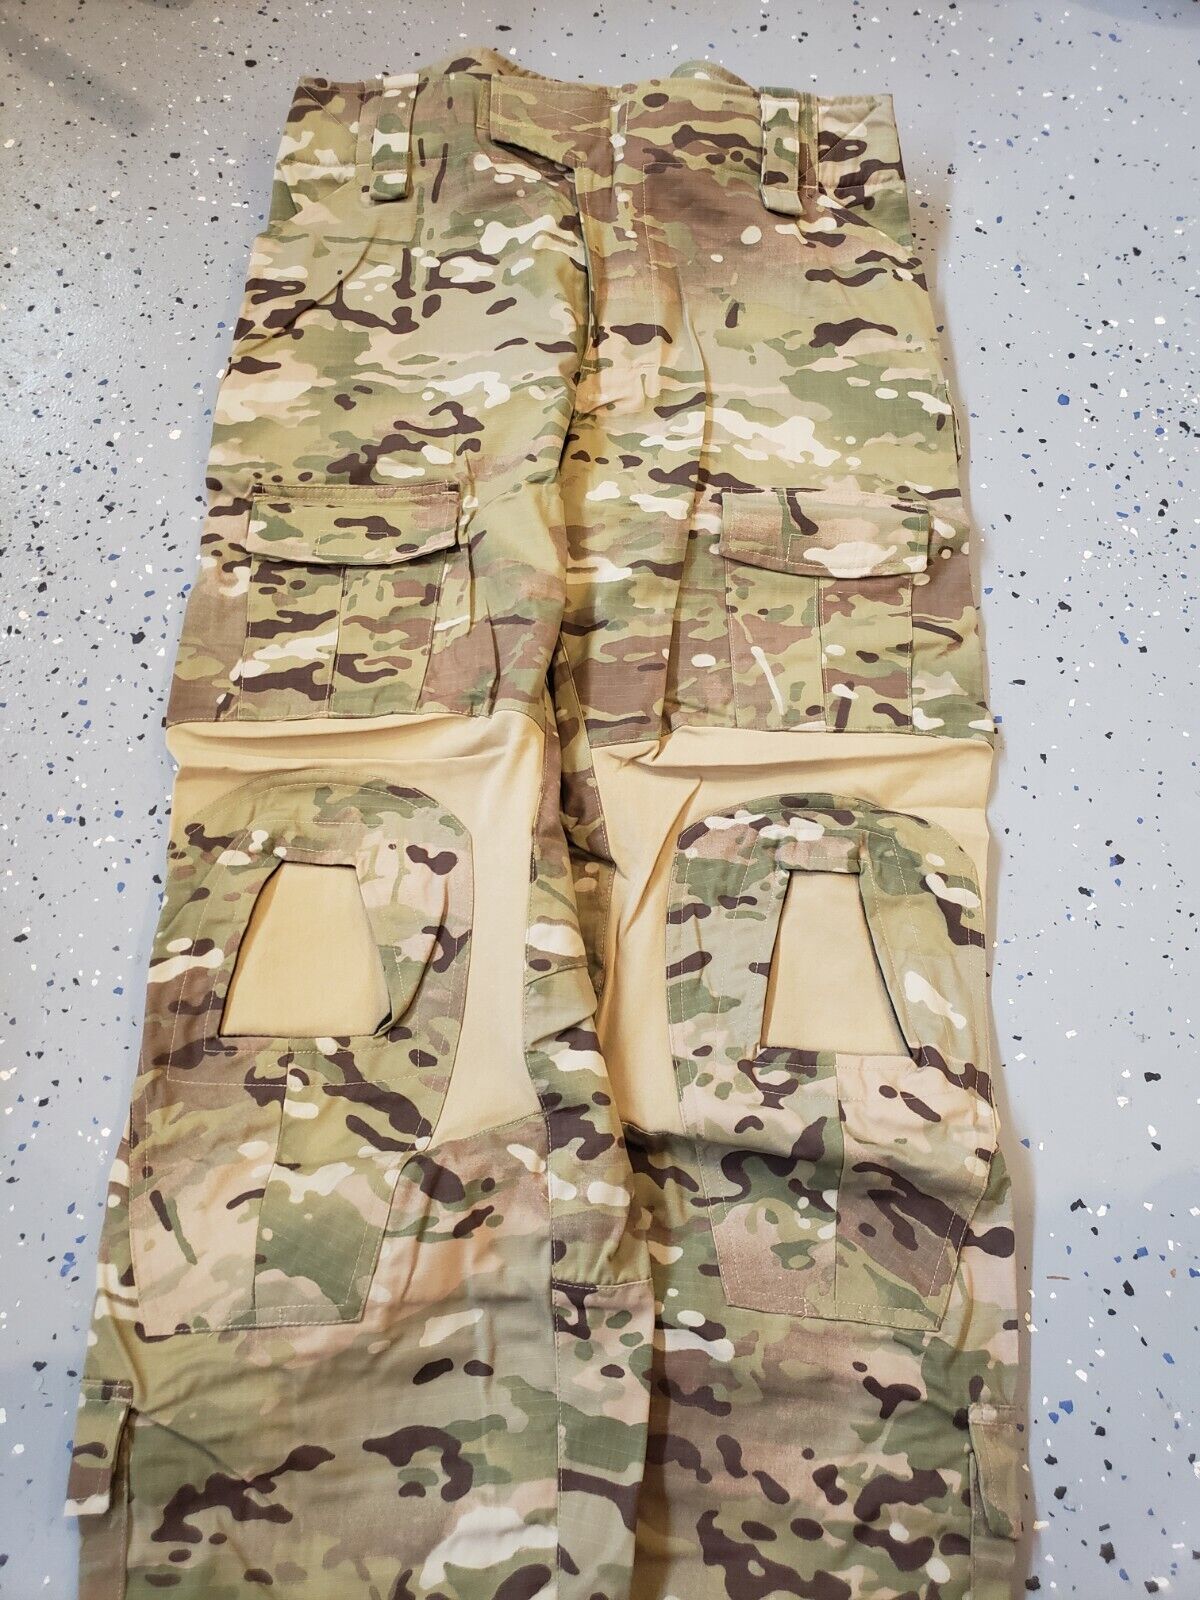 36R Crye Combat Pants, Brand New W/Knee pads